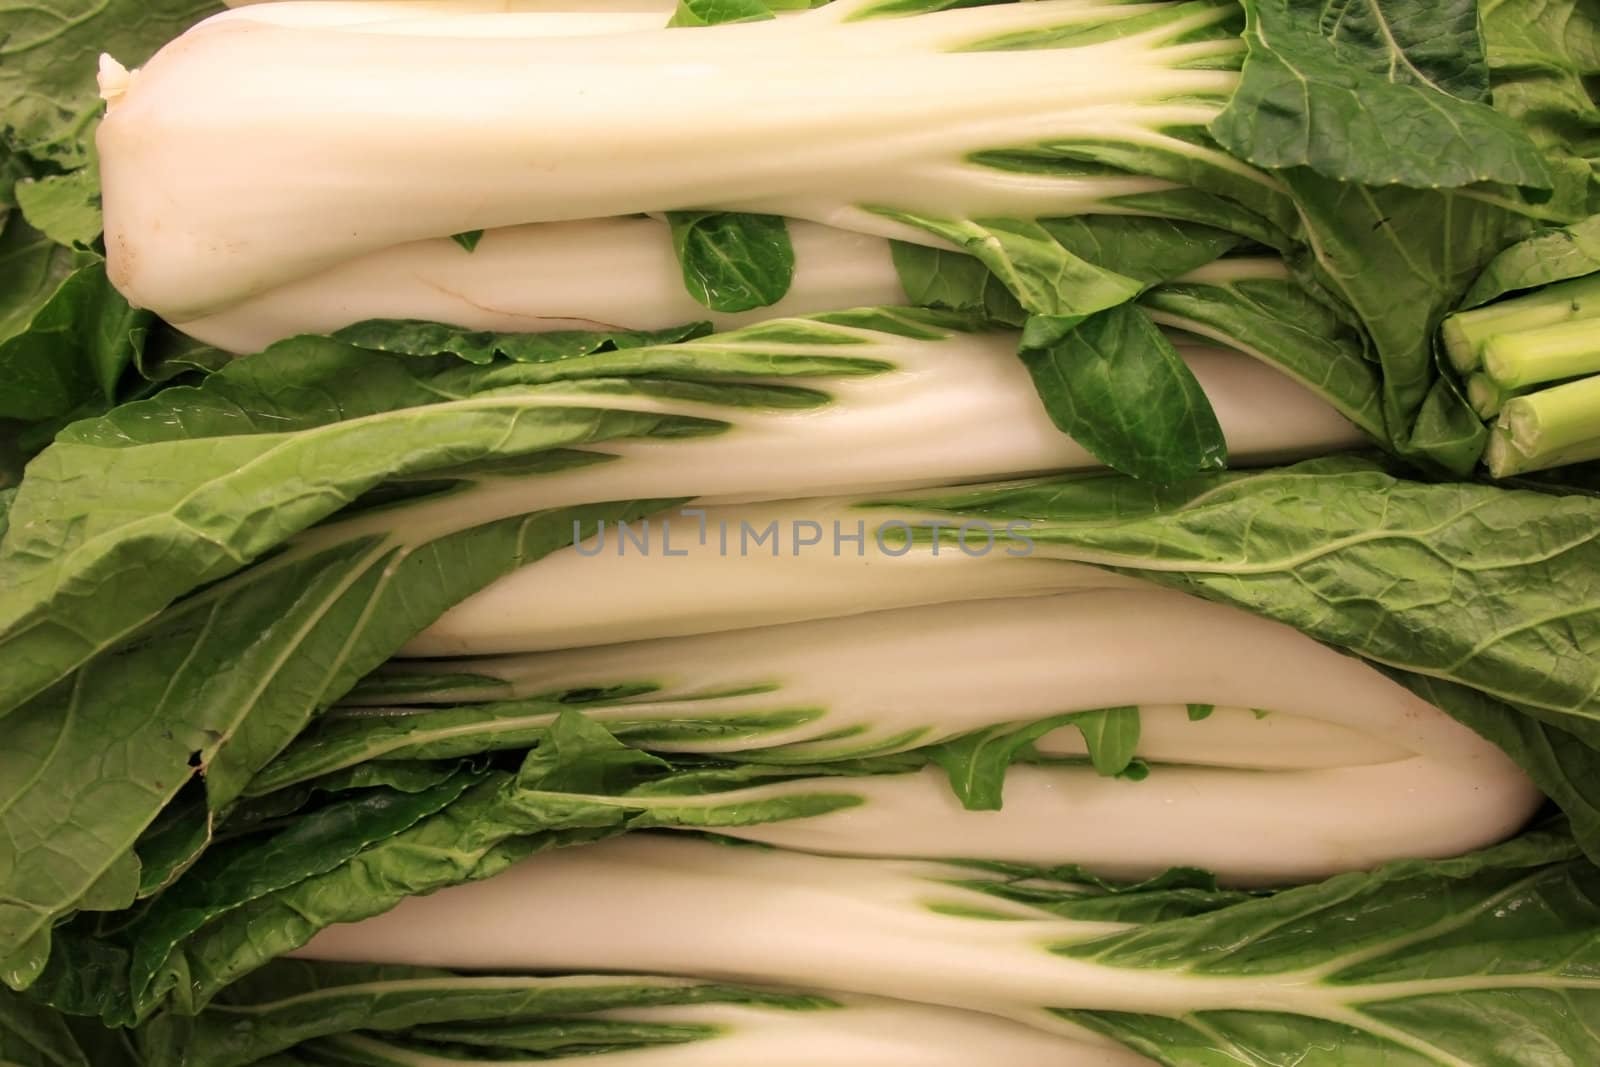 Bok choy (Brassica rapa) or Chinese cabbage, stacked in a supermarket bin, provide essential vitamins and minerals as well as flavor to stir fry and other gourmet dishes